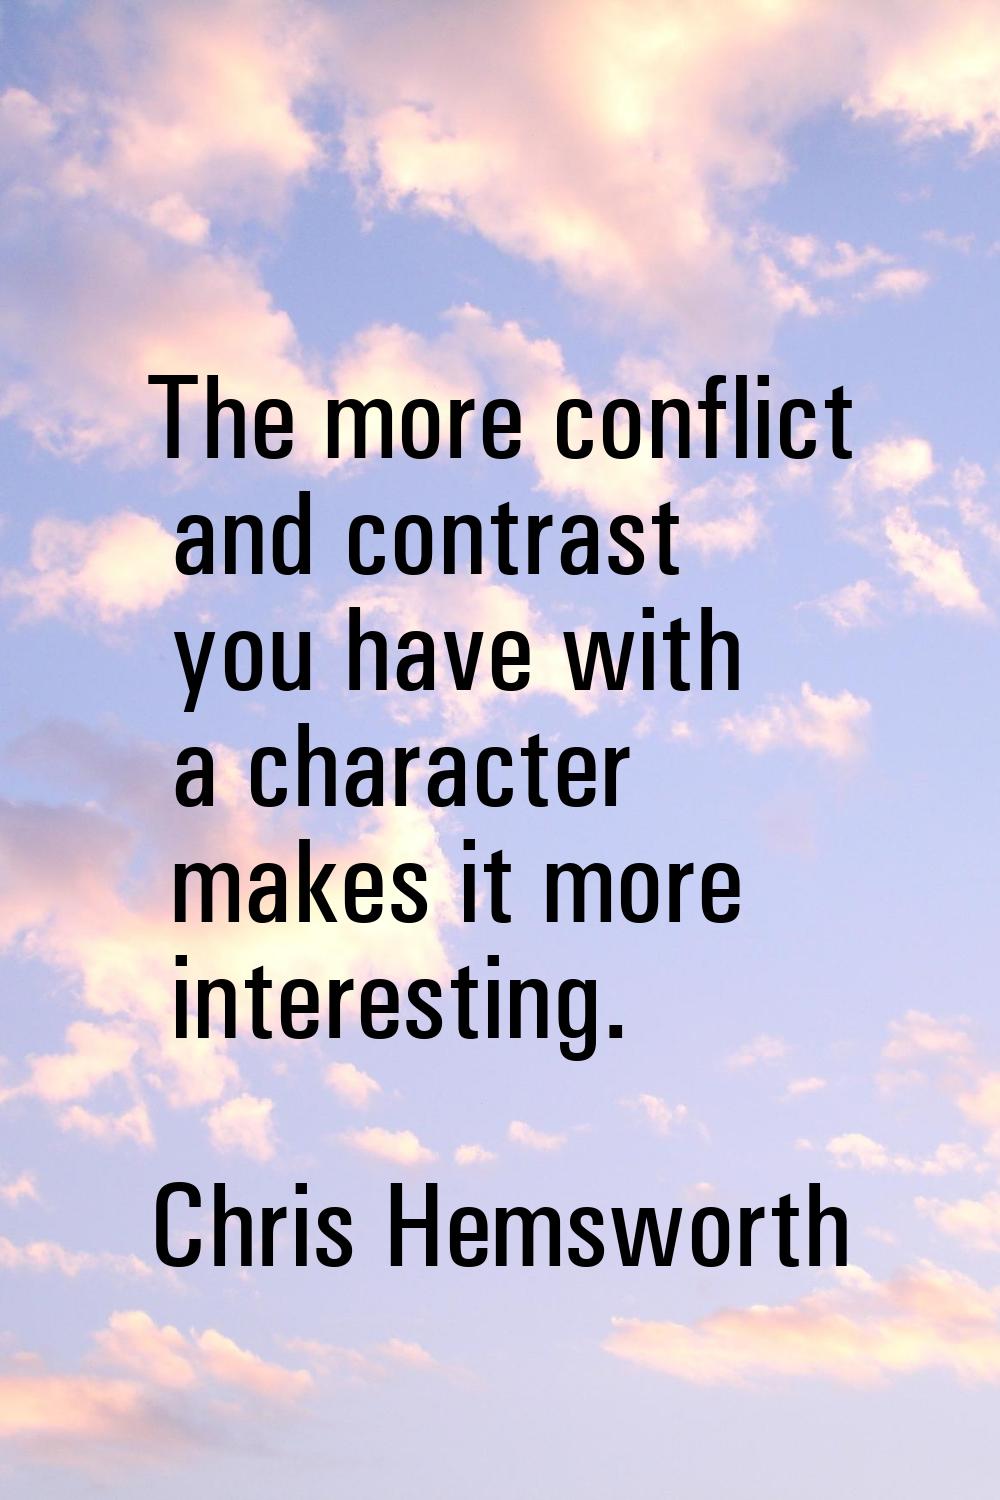 The more conflict and contrast you have with a character makes it more interesting.